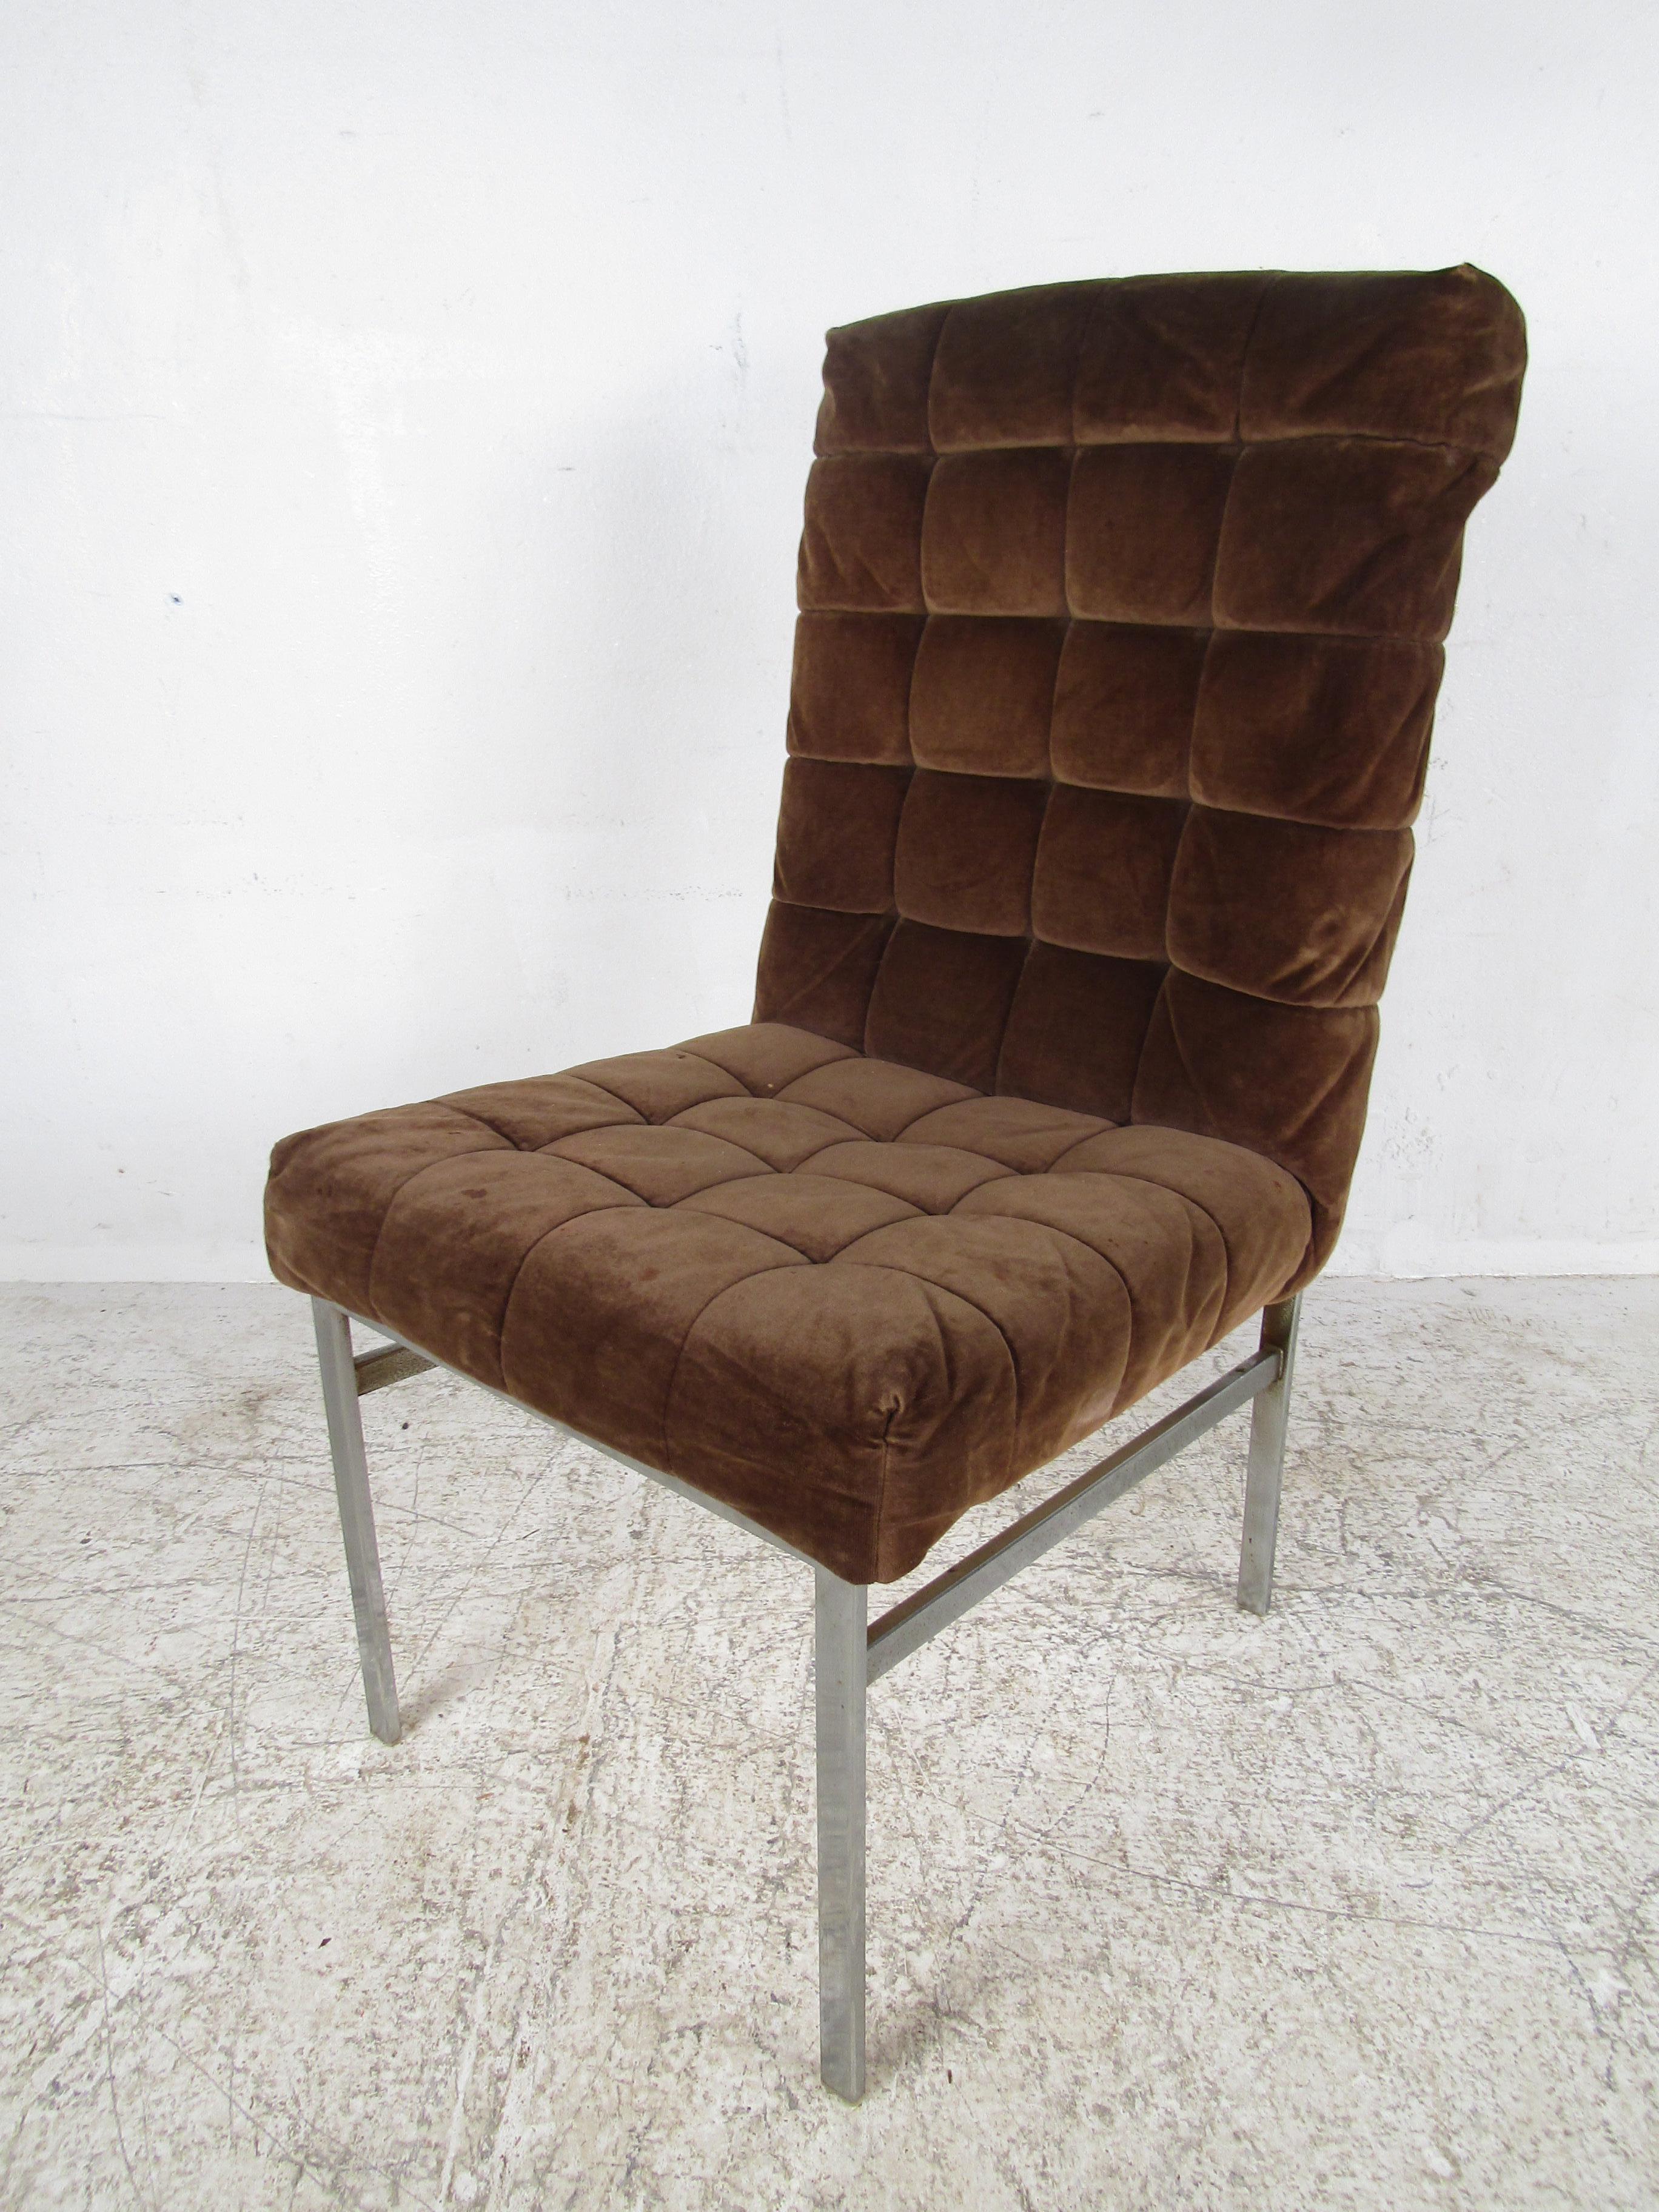 Set of 4 Midcentury Dining Chairs with Tufted Upholstery In Fair Condition For Sale In Brooklyn, NY